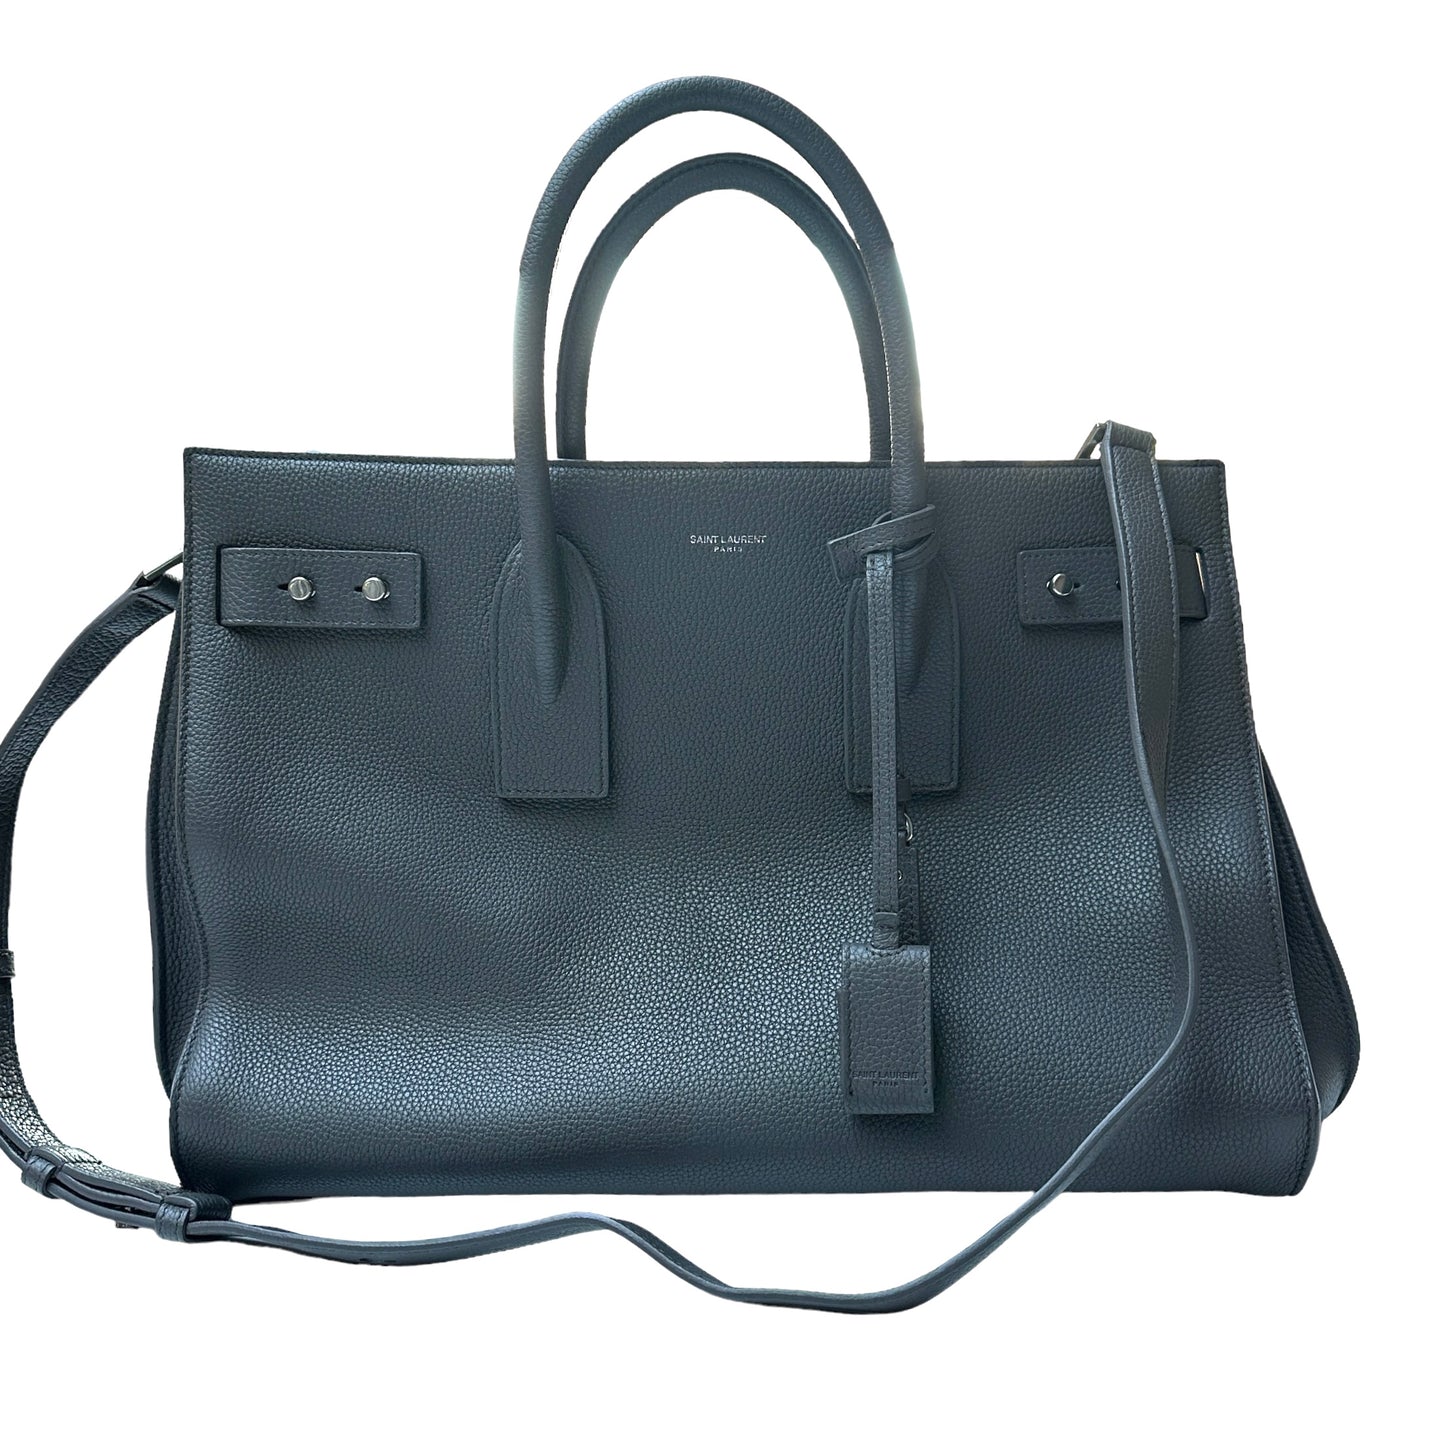 Large Sac De Jour in Grey Leather